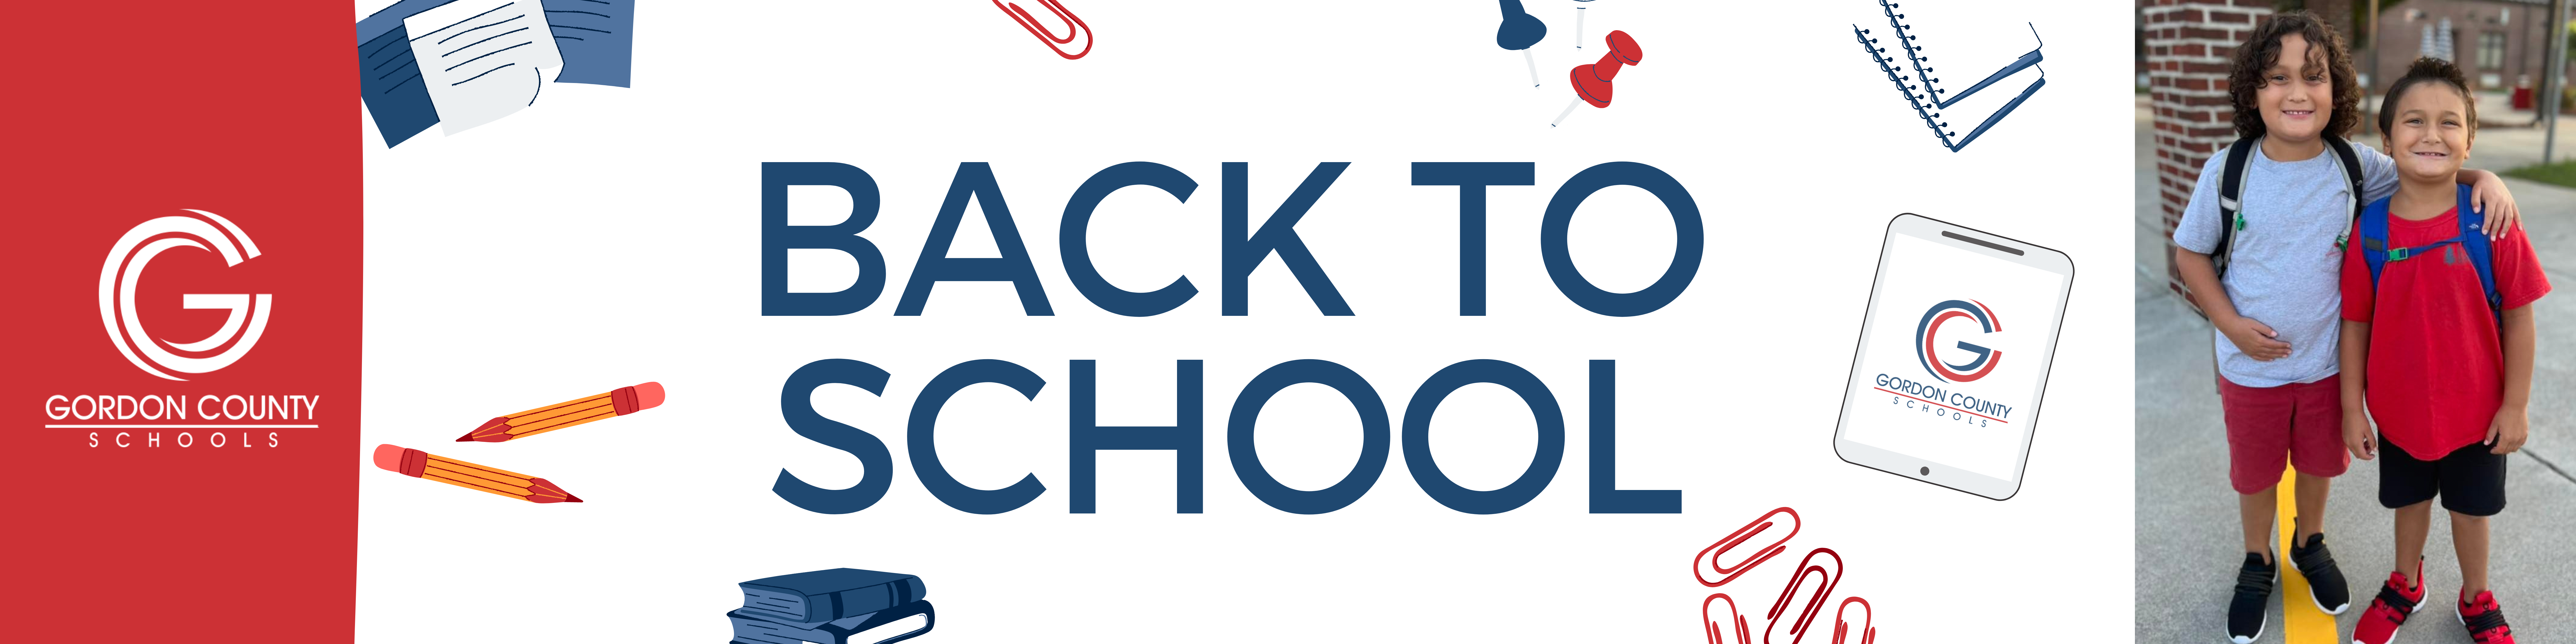 BACK TO SCHOOL BANNER - IMAGES OF SCHOOL SUPPLIES, GCS LOGO AND a picture of two boys standing together